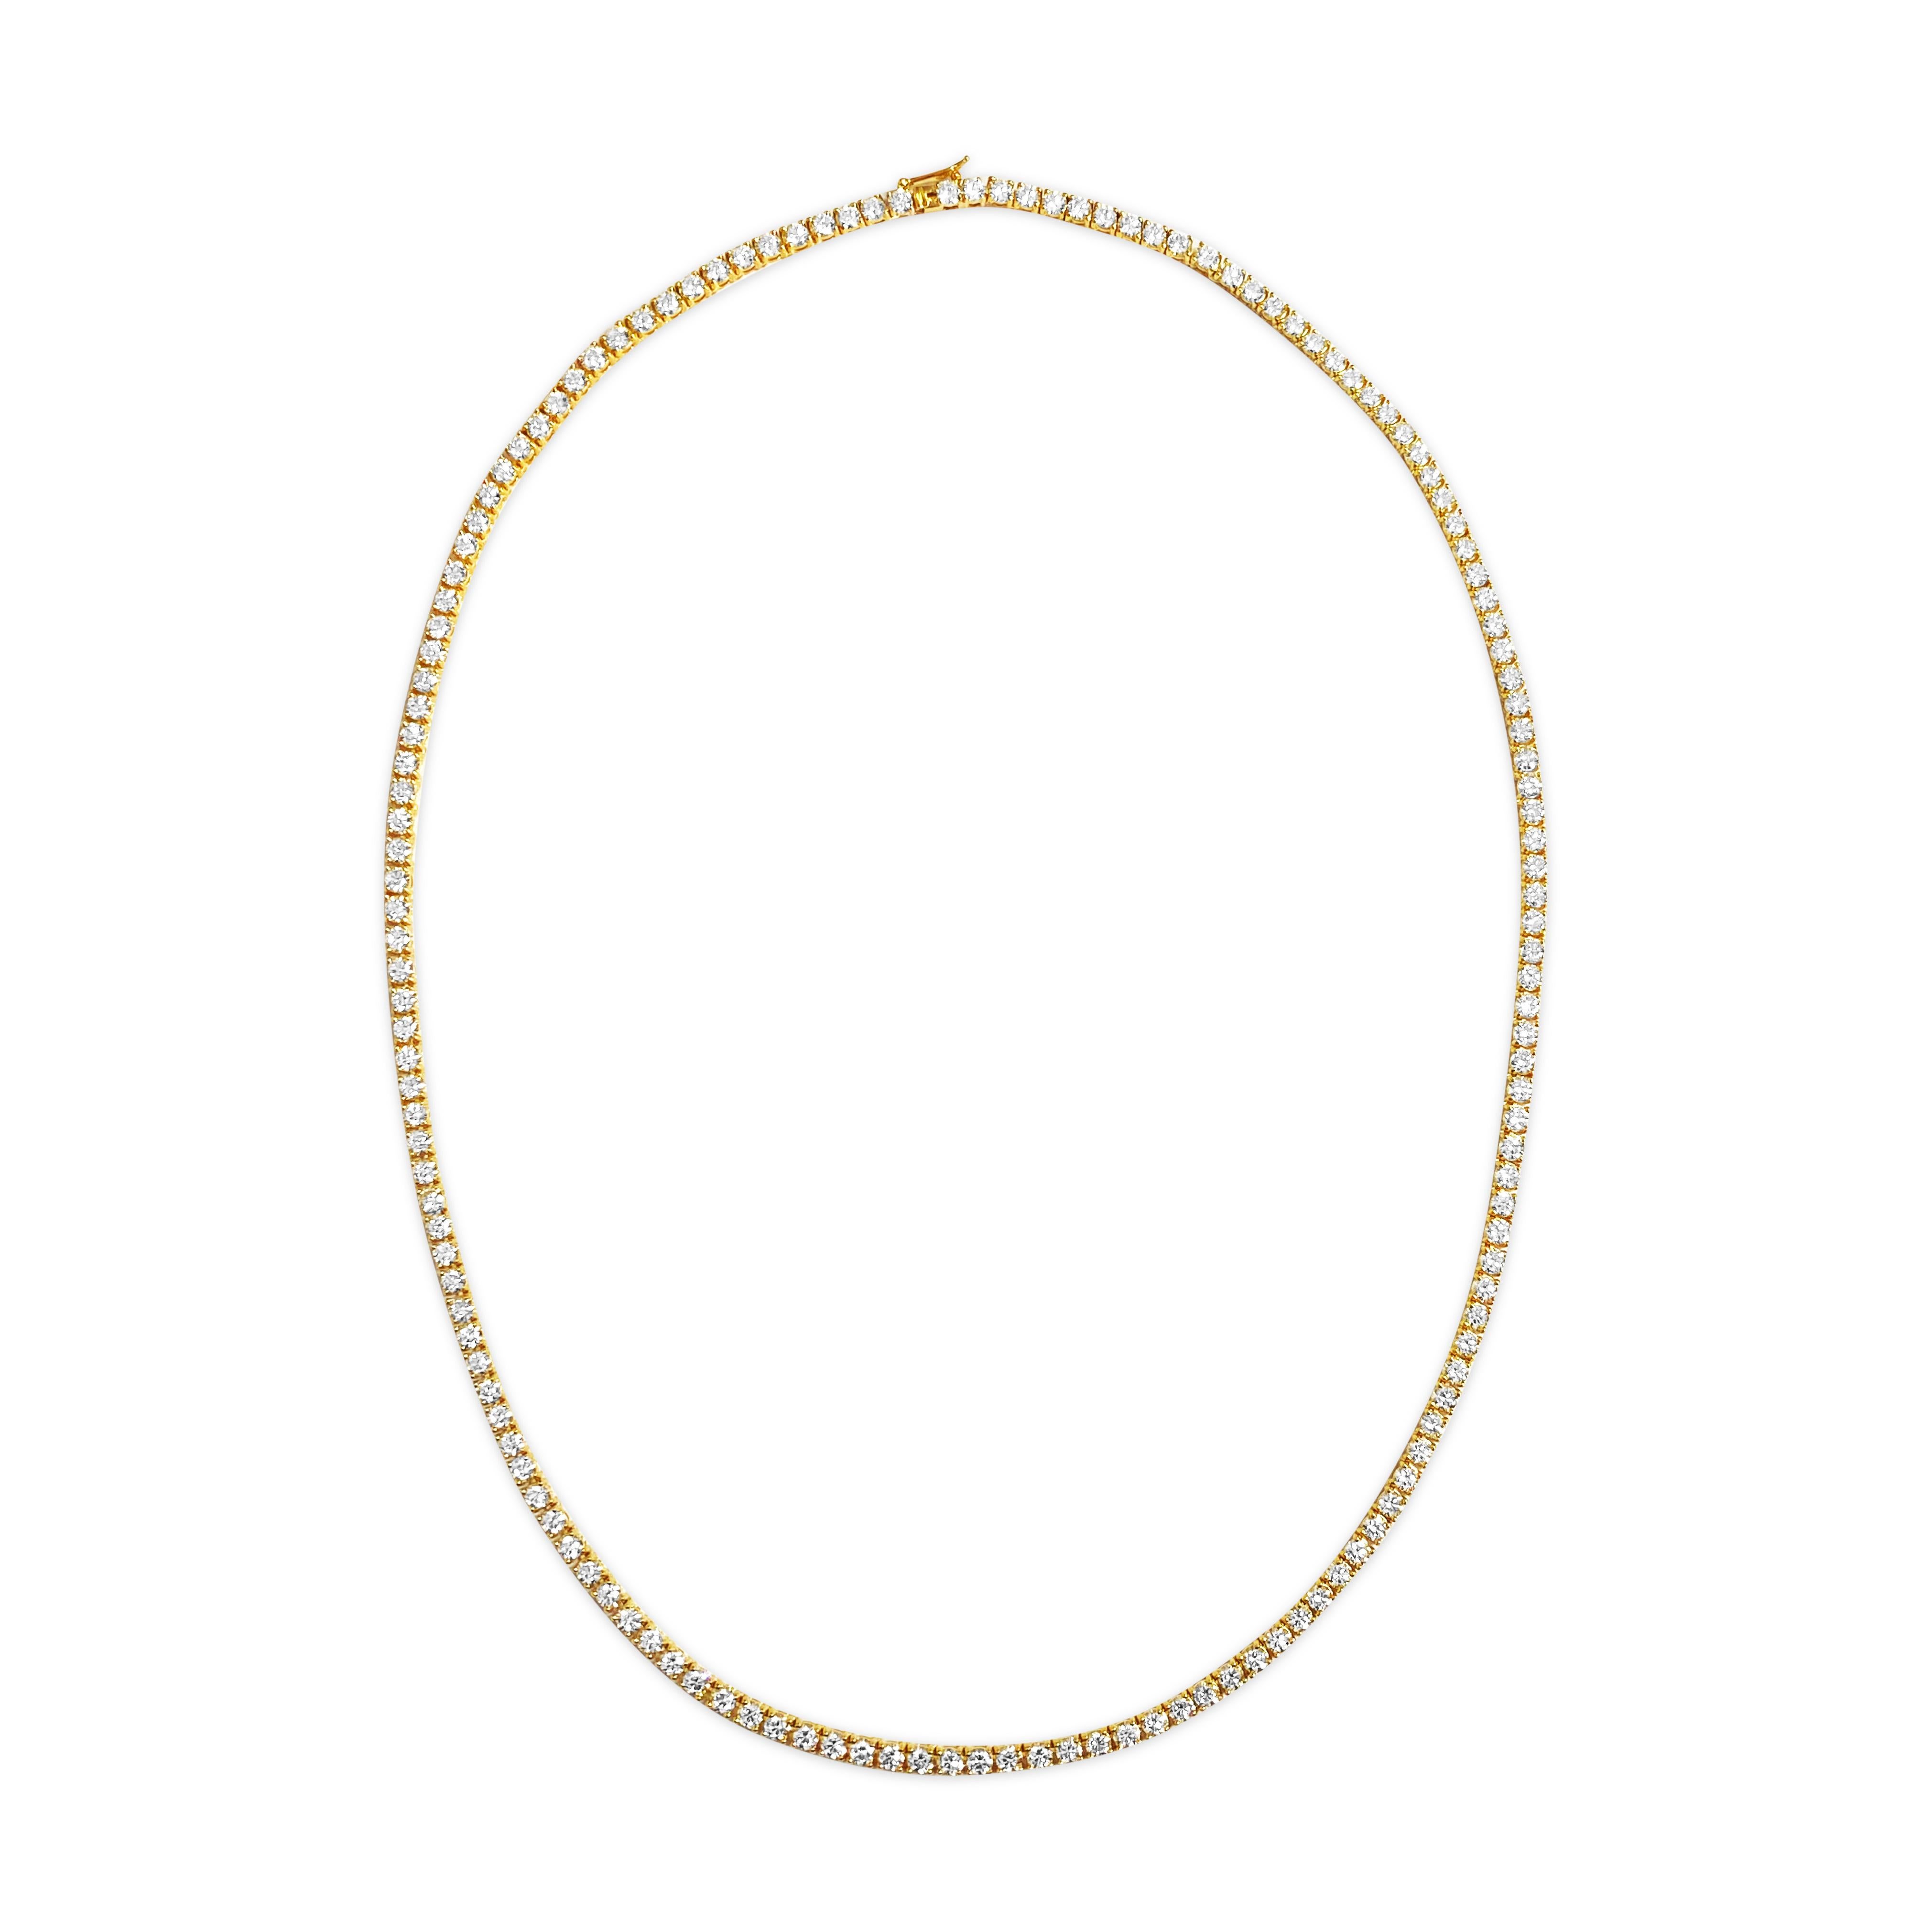 Metal: 14k yellow gold. 

Diamonds: 15.00cwt 
Round brilliant cut
VVS clarity. H color
100% natural earth mined diamonds

Diamonds set in prongs. 
Necklace length: 20 inches.  

Beautiful unisex diamond tennis necklace. Gorgeous luster and shine.